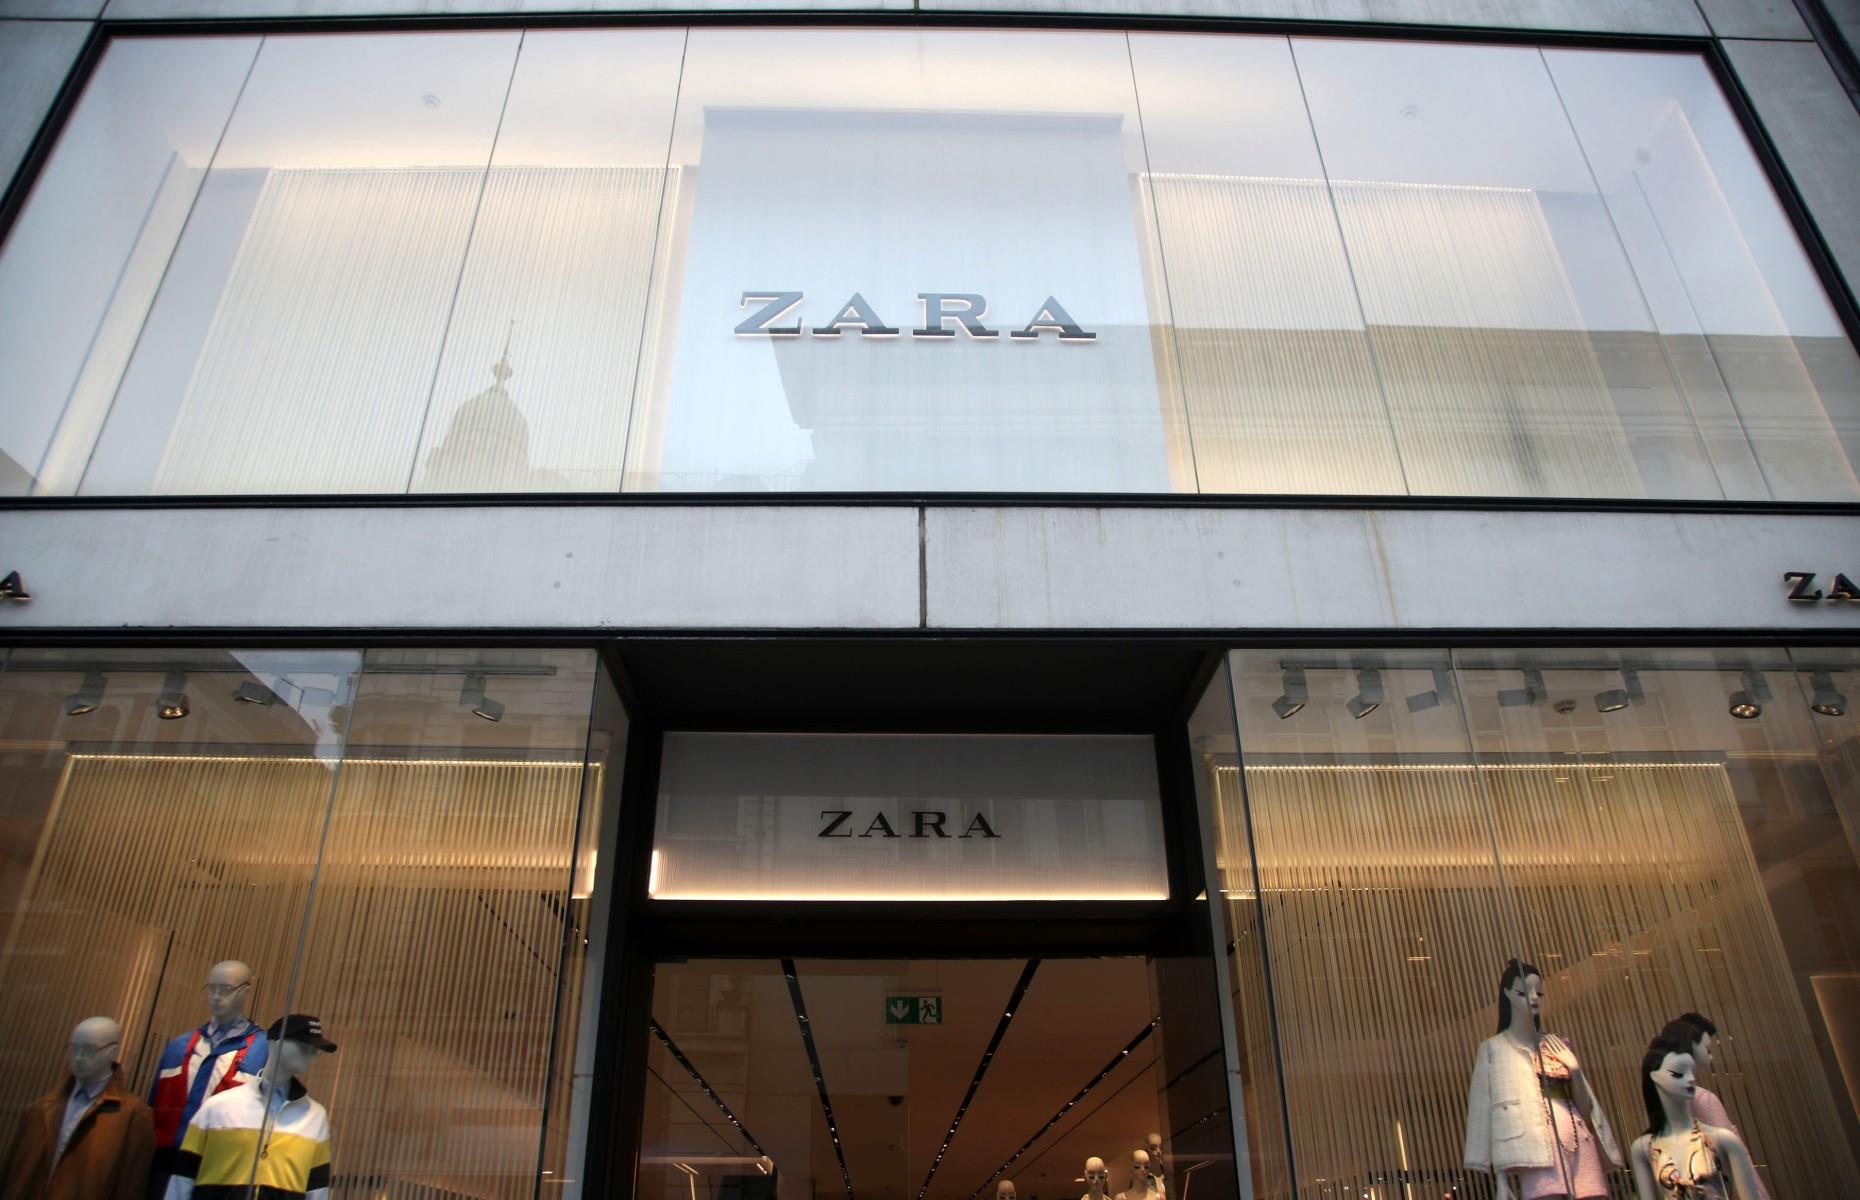 Over 600 Zara stores opened by 1997